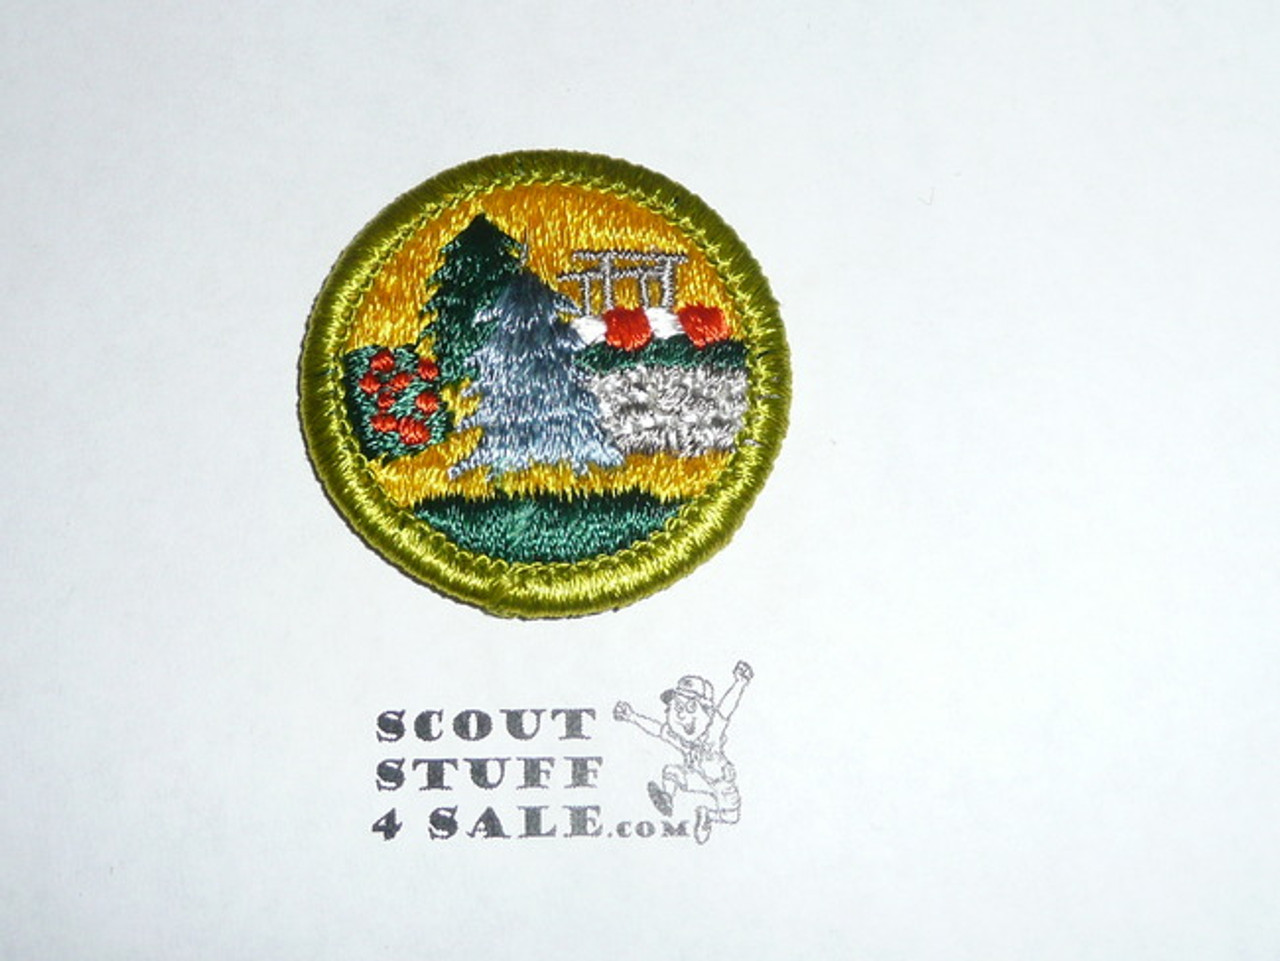 Landscape Architecture - Type H - Fully Embroidered Plastic Back Merit Badge (1972-2002)